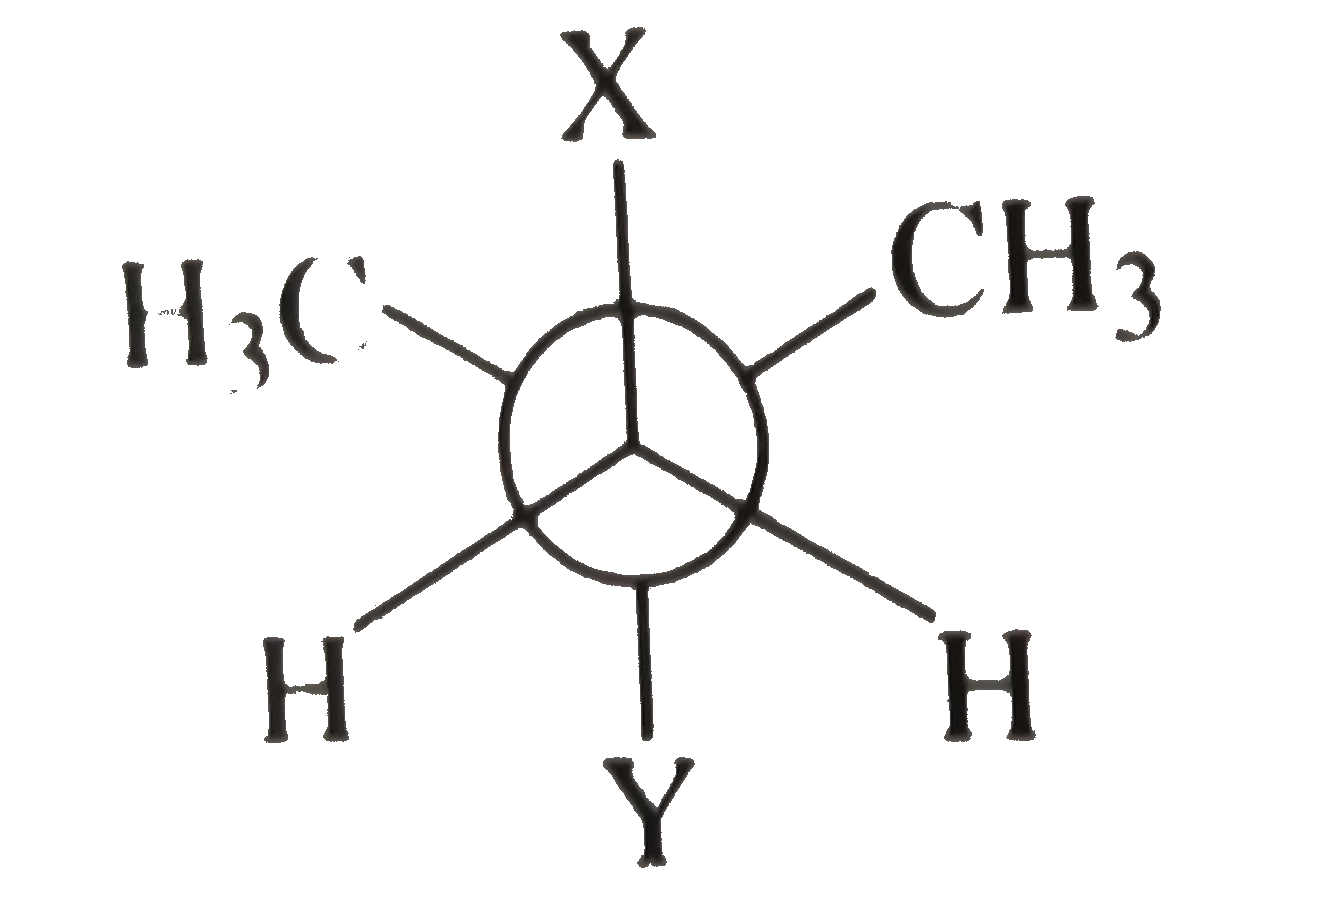 In the Newman projection for 2,2- dimethylbutane      X and Y can, respectively, be